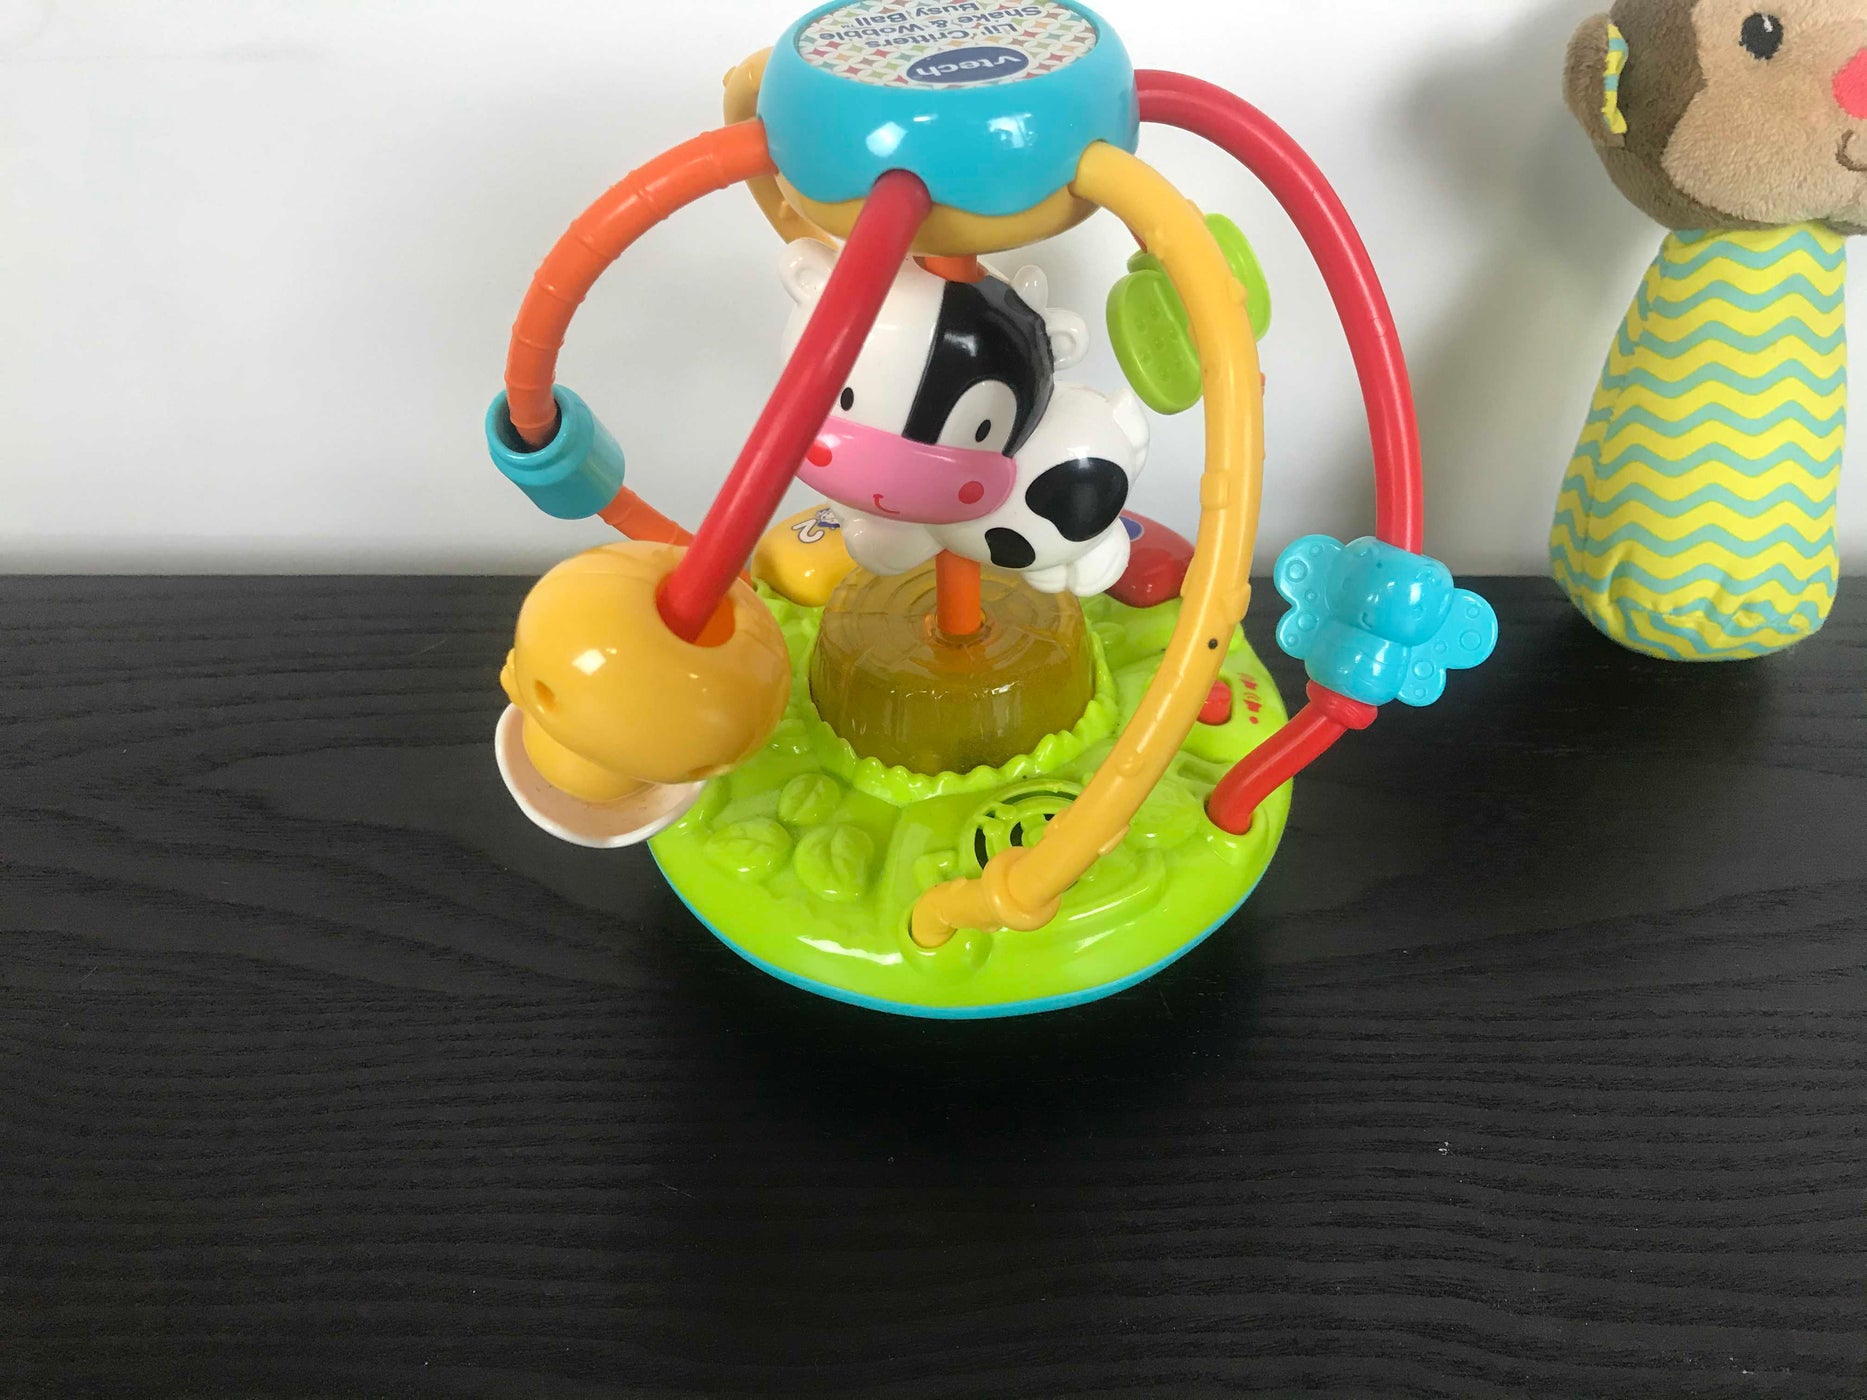 vtech lil critters shake and wobble